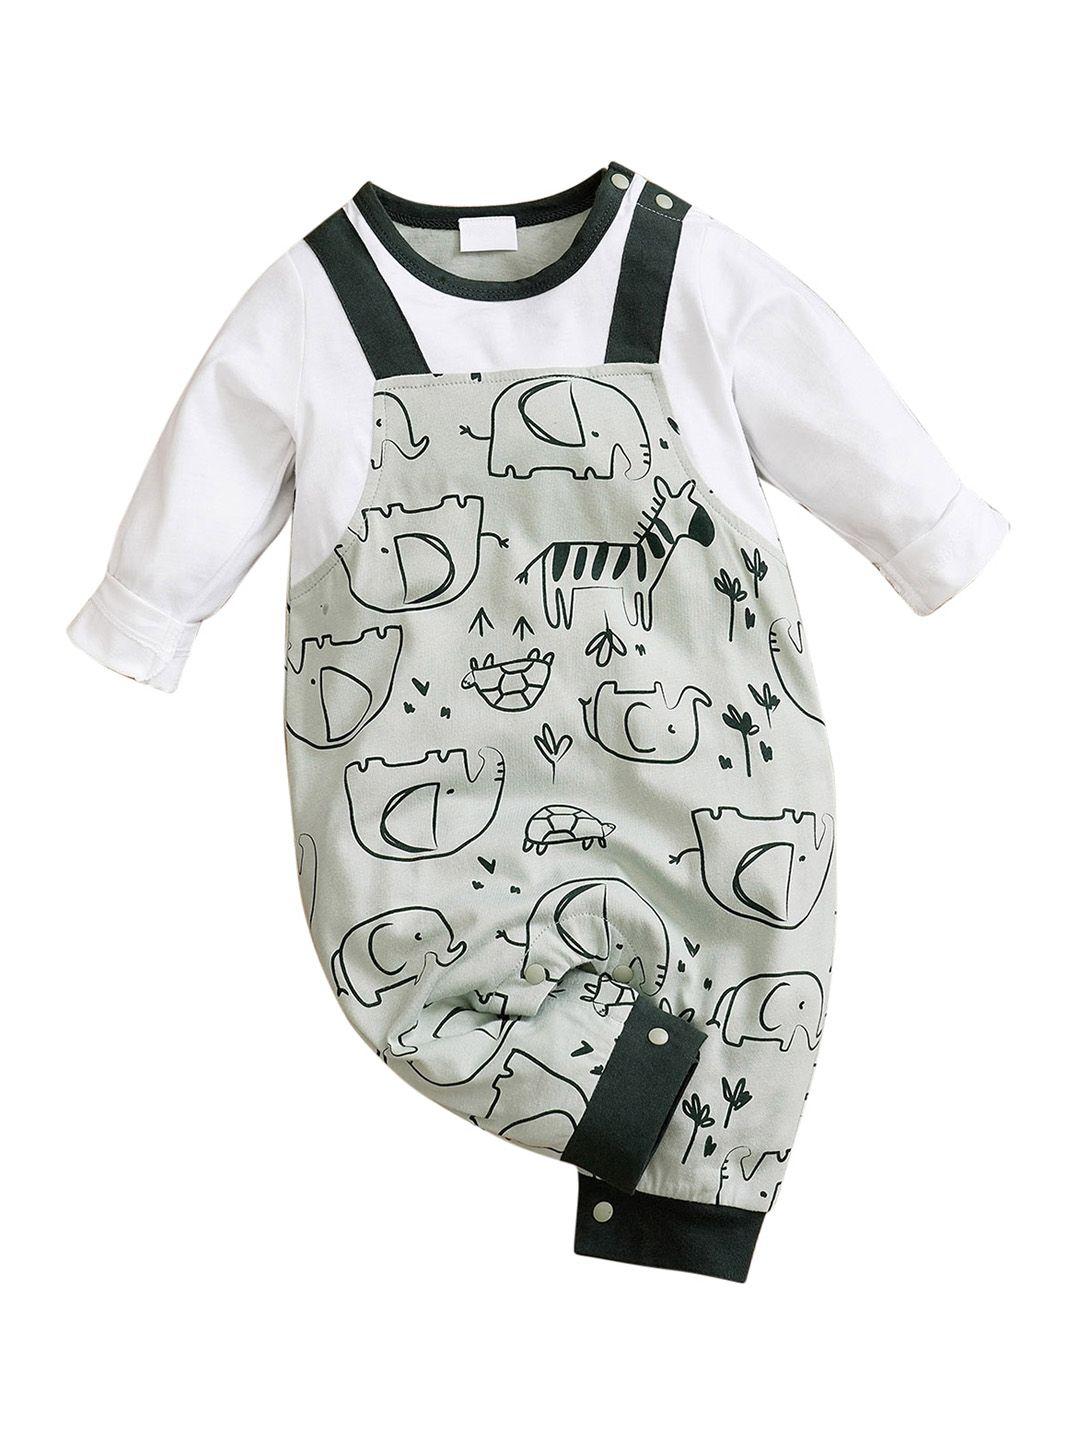 stylecast infants printed cotton rompers